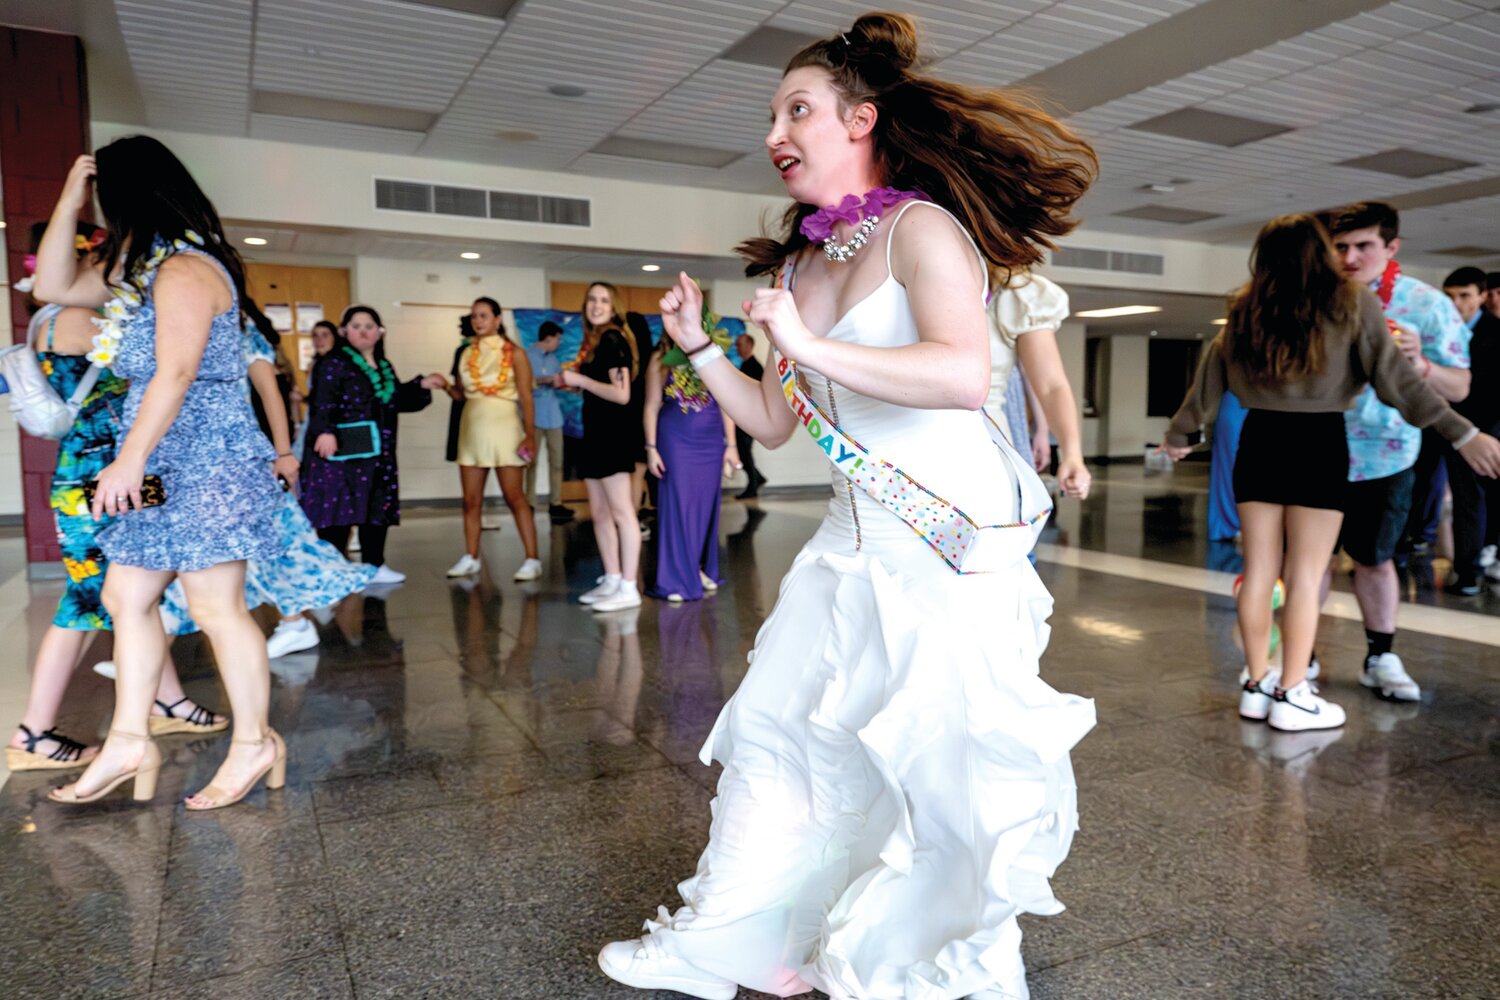 Charlotte Brock celebrates her birthday and enjoys dancing at Central Bucks East High School’s first Unified Prom.